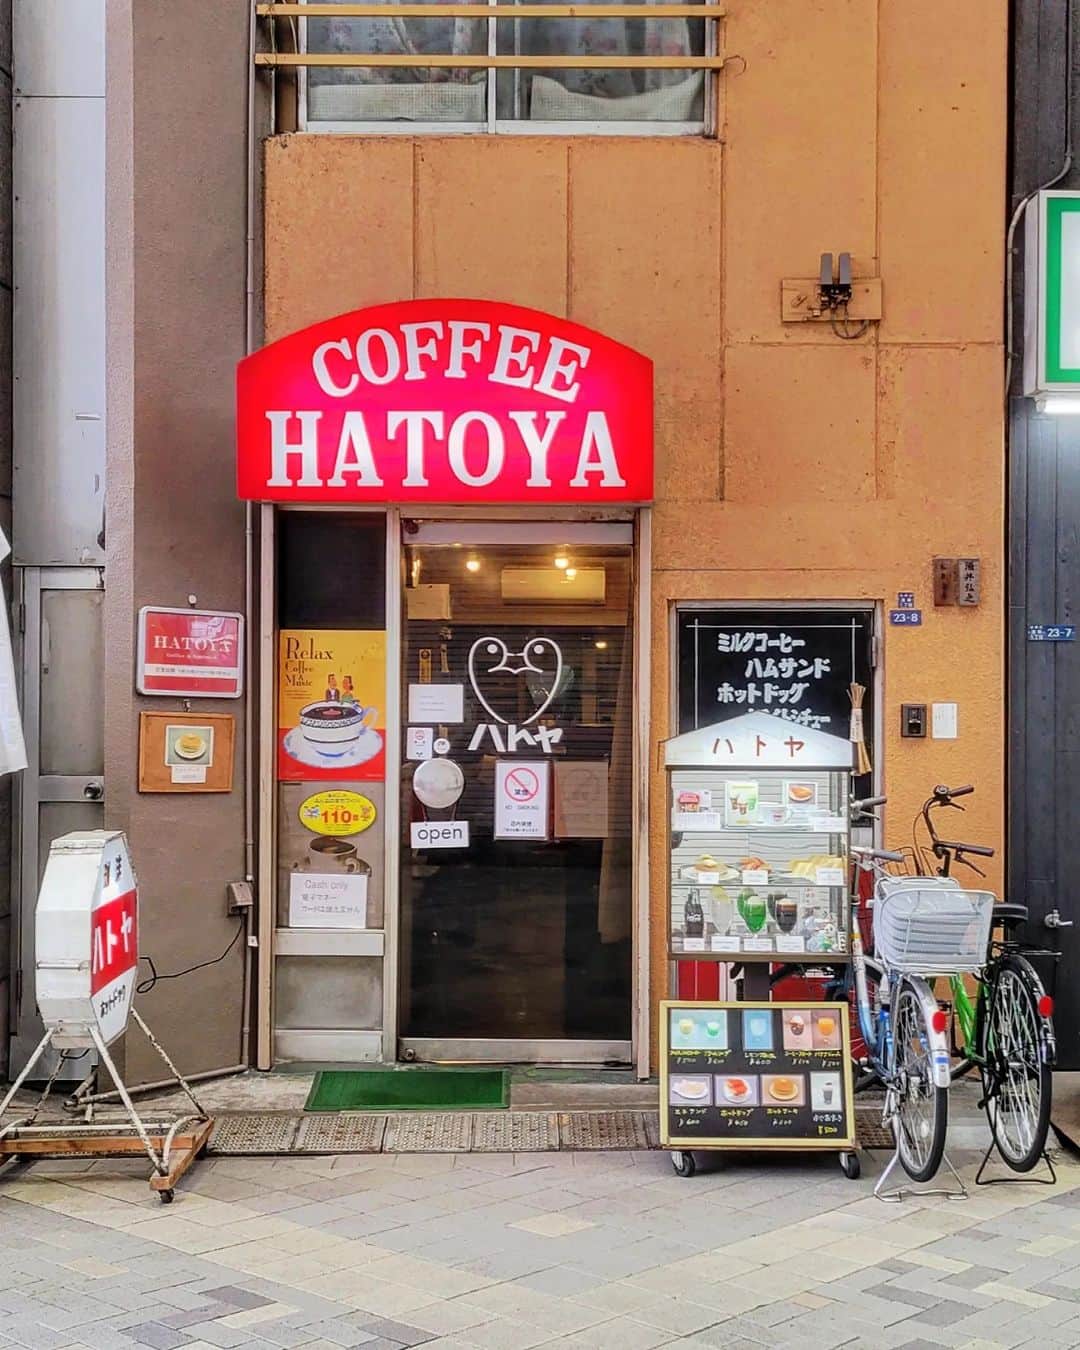 CAFE-STAGRAMMERのインスタグラム：「I can’t concentrate anything. So, I need to take a short break. 何ができるかよりも、何をしてみるかかも♪  #浅草 #☕ #浅草カフェ #浅草喫茶店 #asakusa #coffeehatoya #コーヒーハトヤ #喫茶店 #cafetyo #tokyocafe #カフェ #cafe #tokyo #咖啡店 #咖啡廳 #咖啡 #카페 #คาเฟ่ #Kafe #coffeeaddict #カフェ部 #cafehopping #coffeelover #discovertokyo #visittokyo #instacoffee #instacafe #東京カフェ部 #sharingaworldofshops」